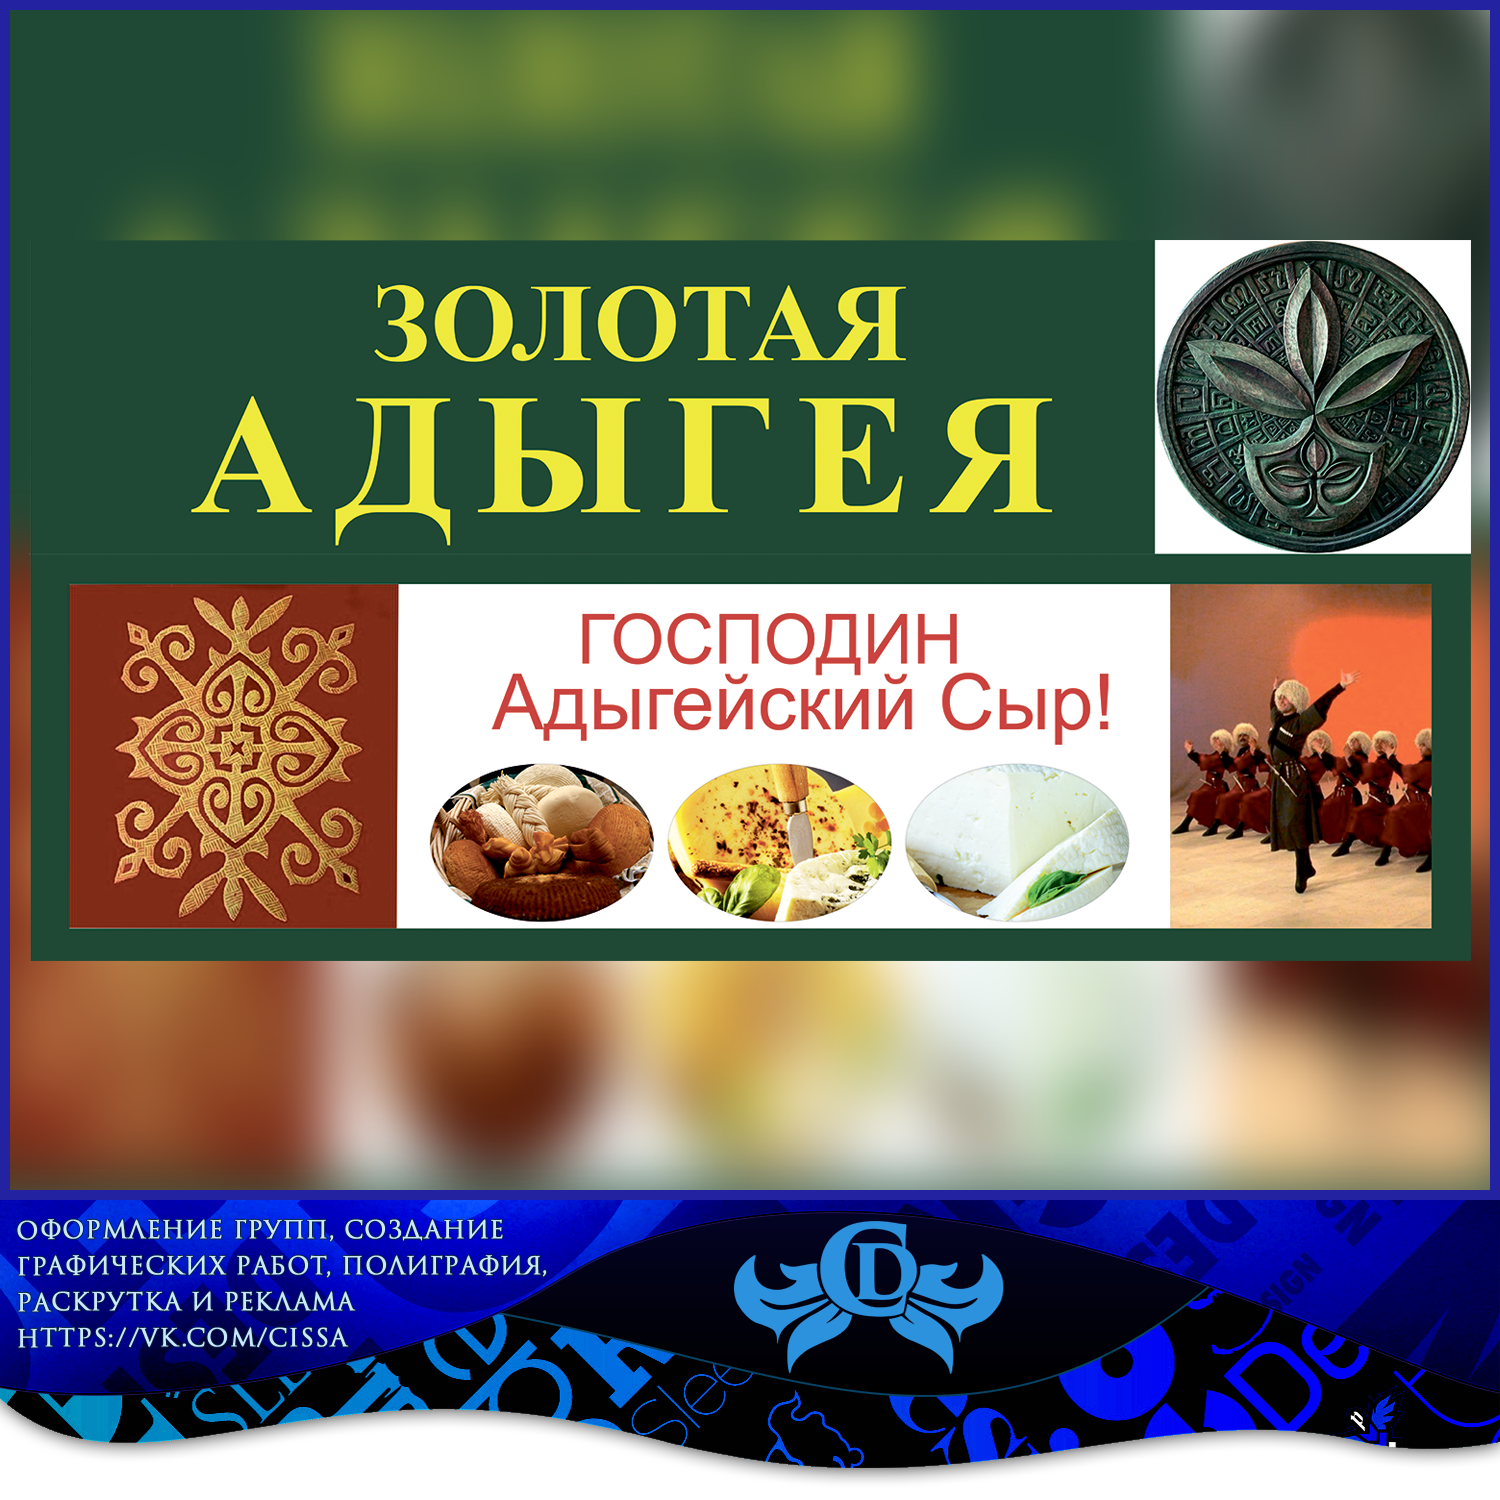 http://images.vfl.ru/ii/1505885012/600f21a2/18666123.png